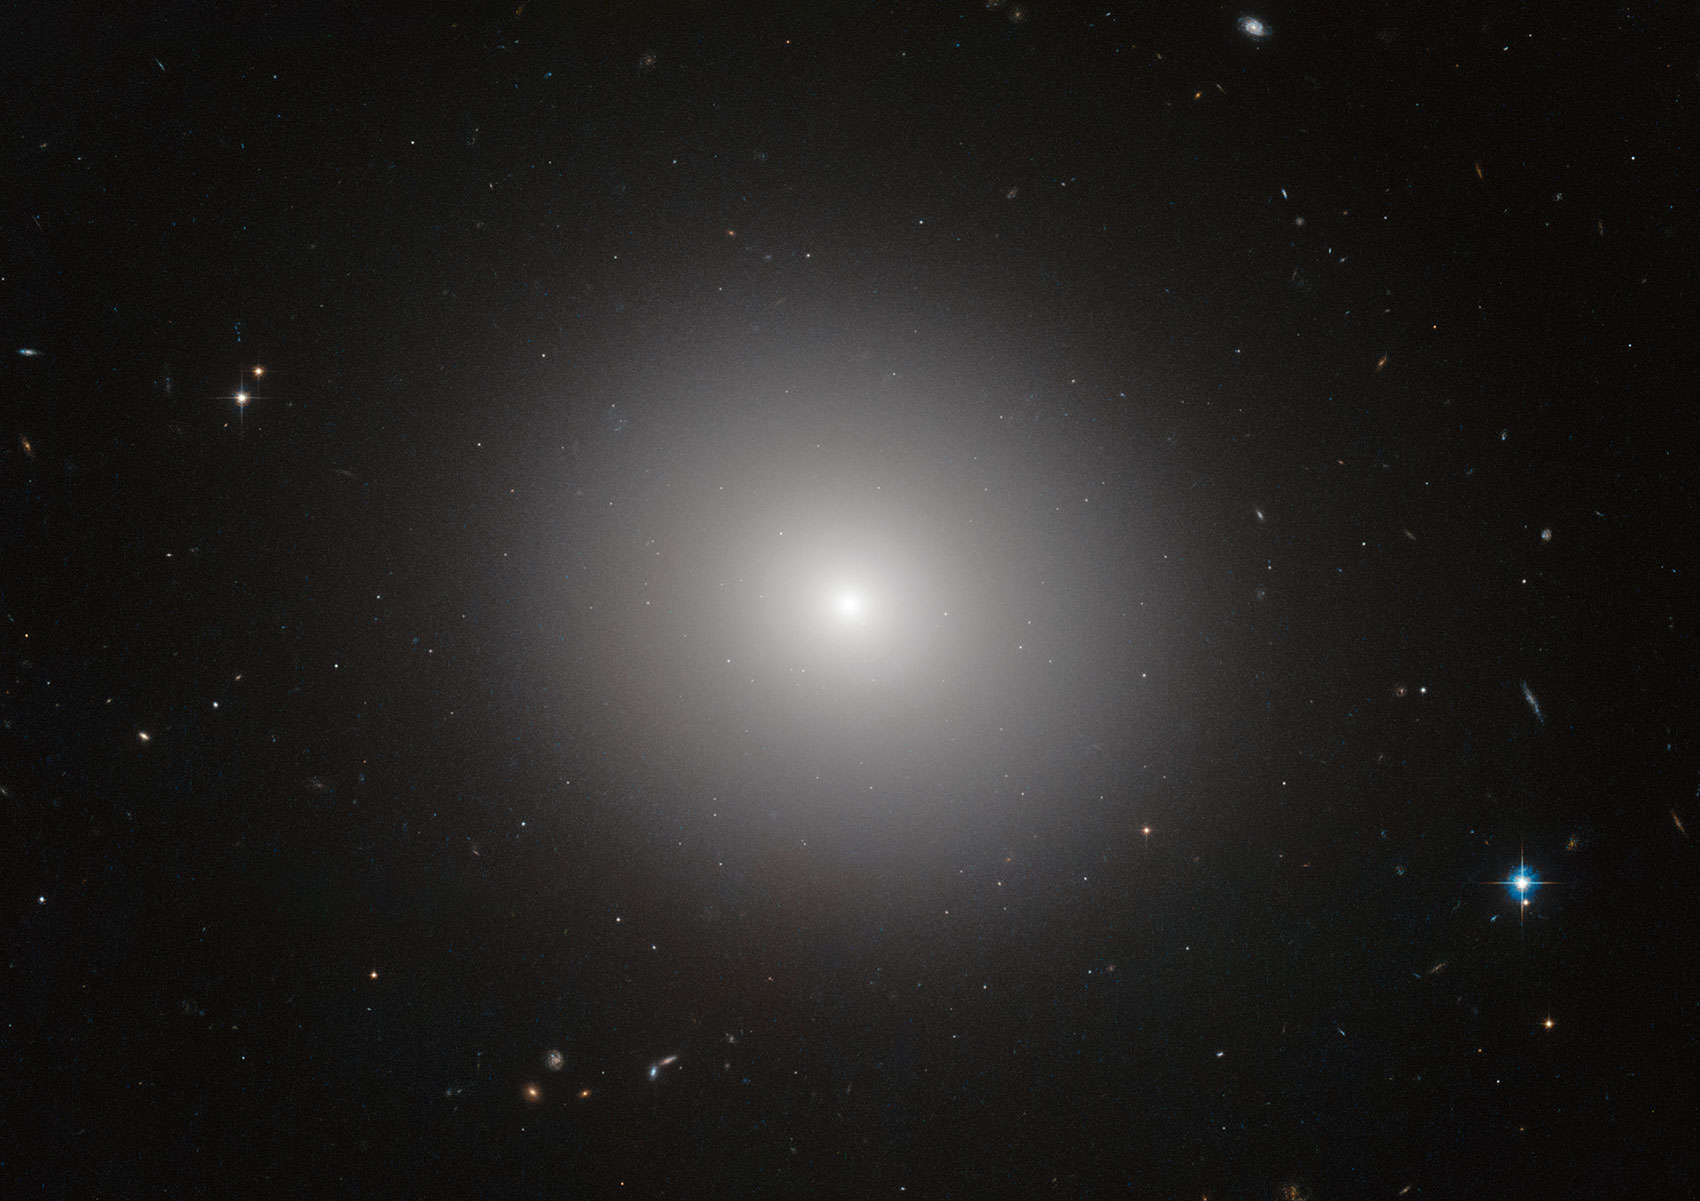 The elliptical galaxy IC 2006, which lies about 65 million light years from Earth. Credit:  ESA/Hubble & NASA Image acknowledgement: Judy Schmidt and J. Blakeslee (Dominion Astrophysical Observatory). Note that the image is not related to science release 